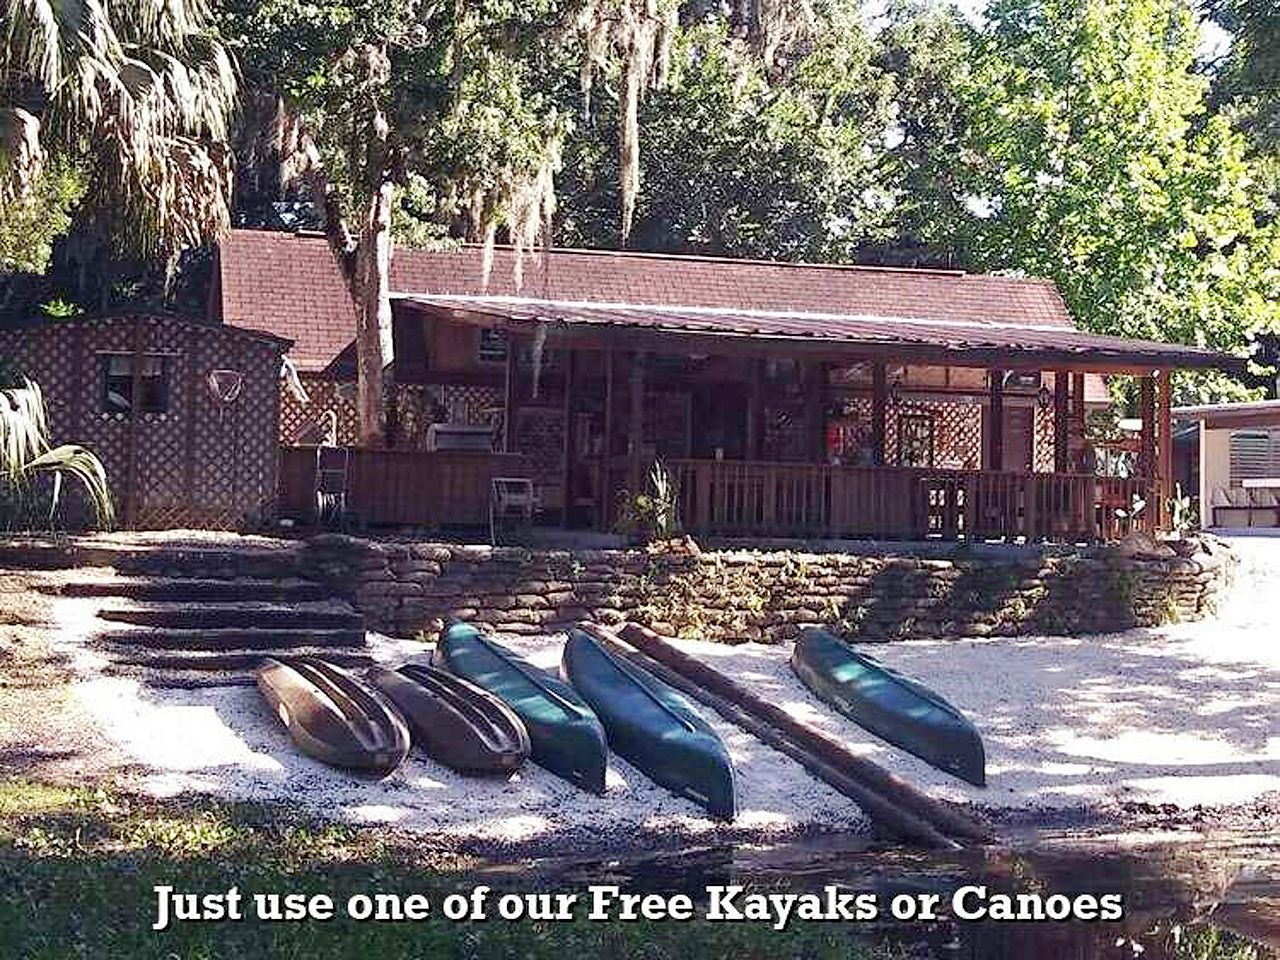 kayaks and canoes are lined up in front of a house